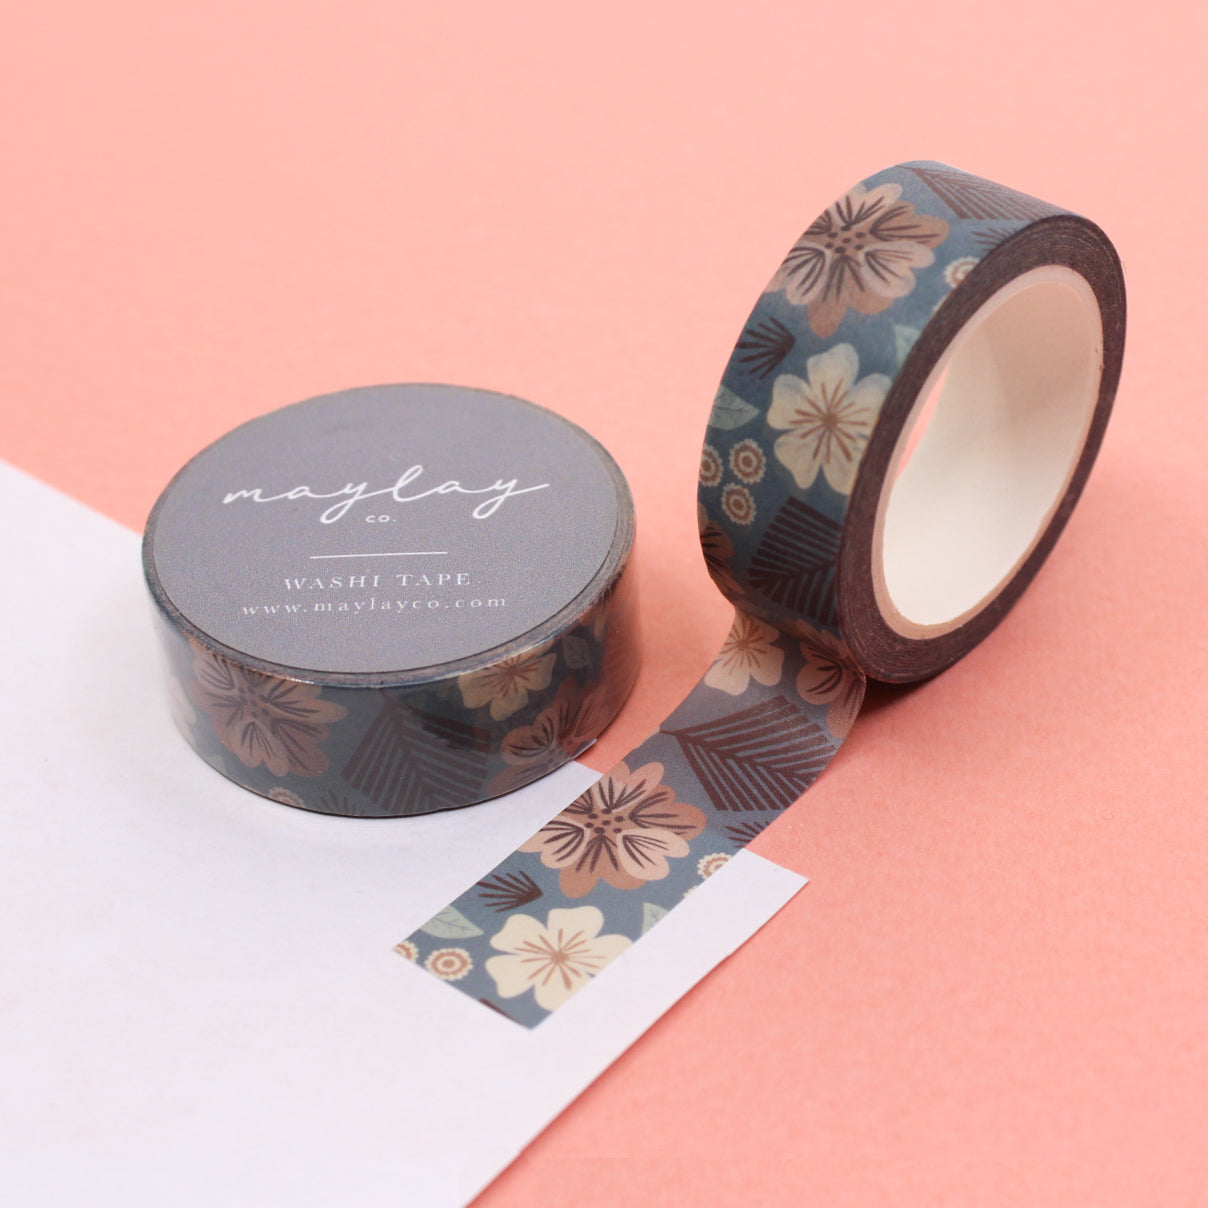 Blue Tropic Floral Washi Tape featuring tropical flowers in shades of blue, ideal for adding a refreshing and tropical vibe to your crafts and projects. This tape is from Maylay Co and sold at BBB Supplies Craft Shop.